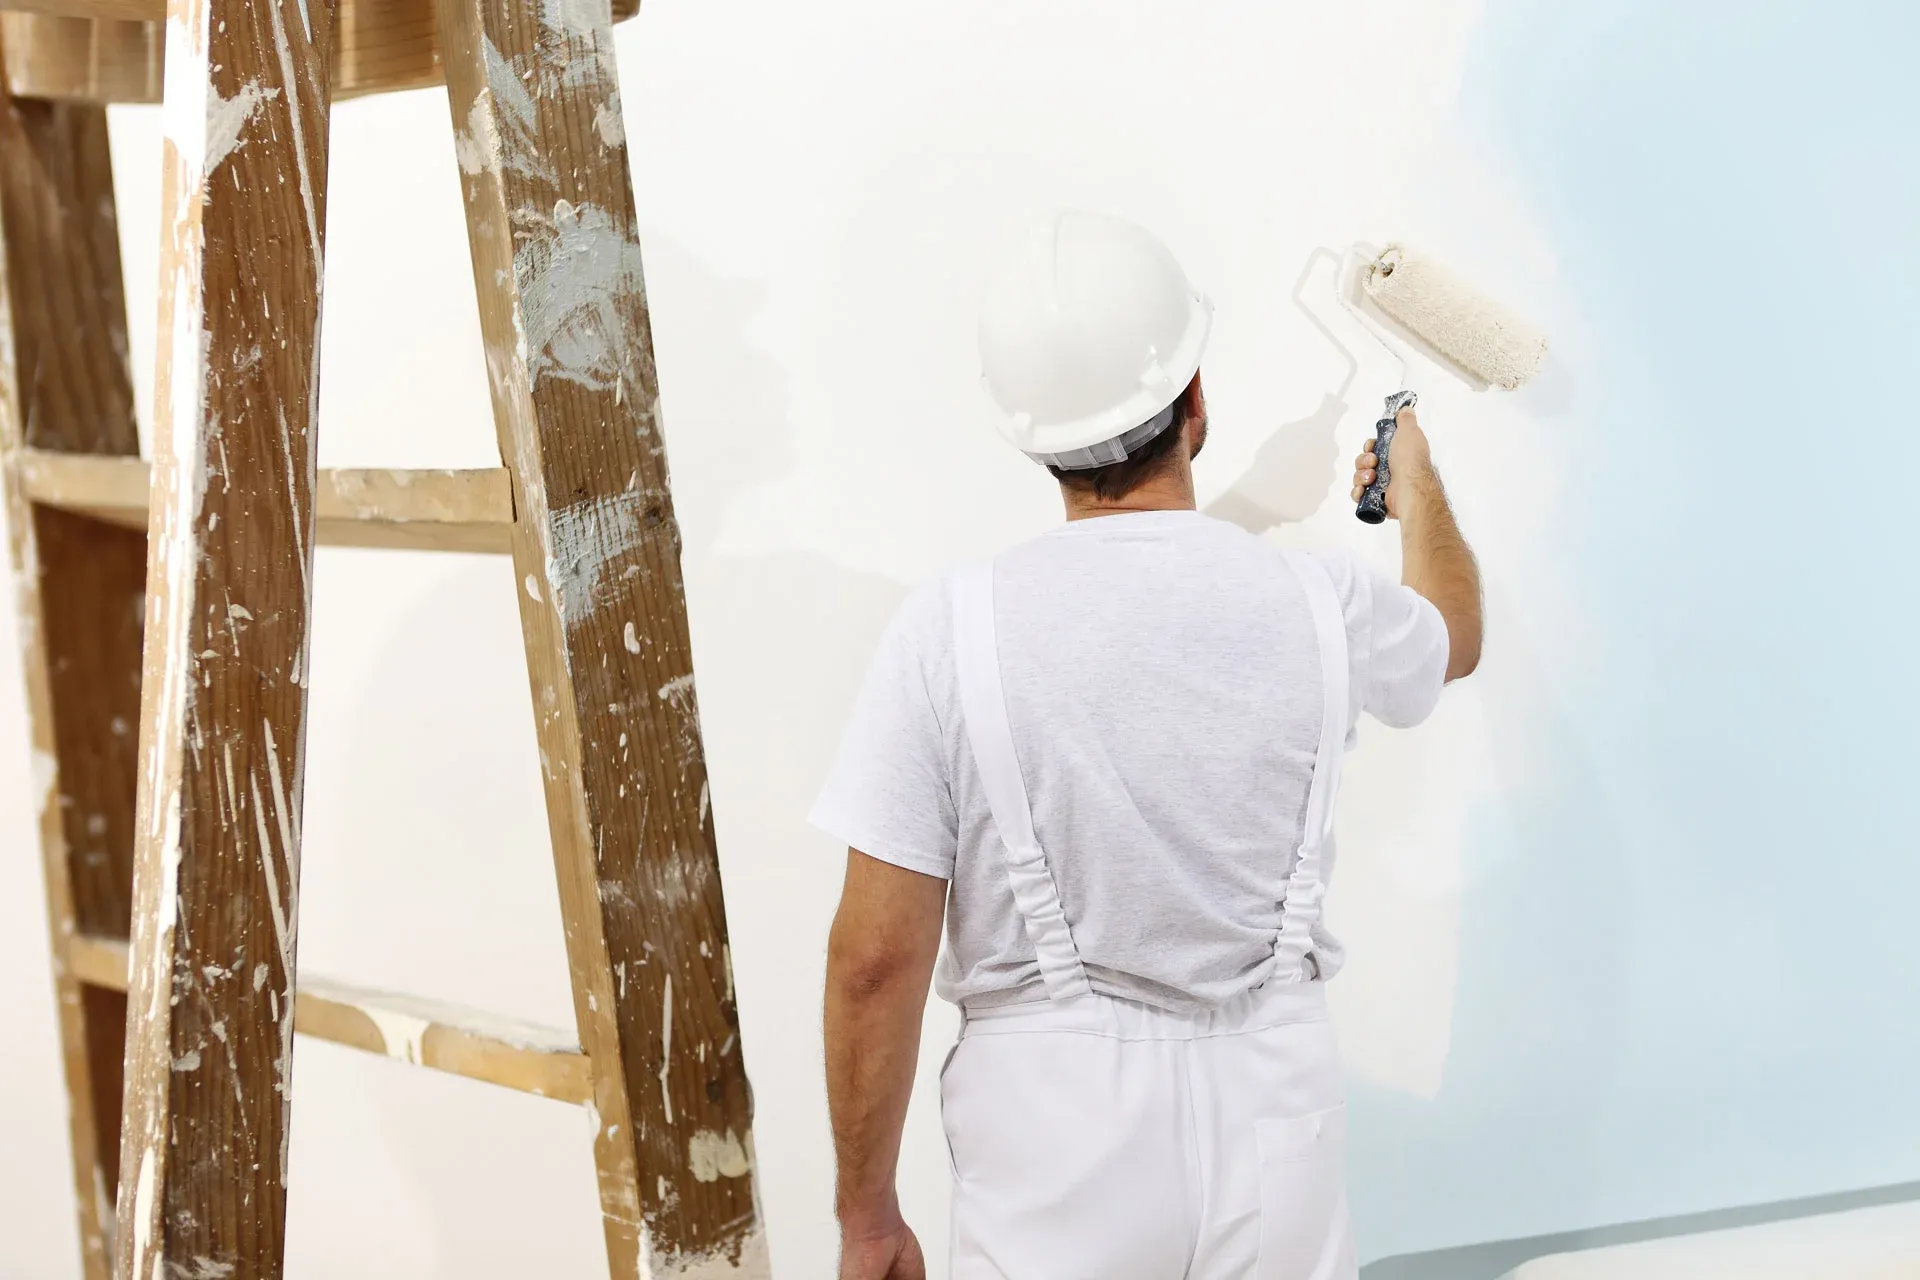 Repainting the Interior of Your Home